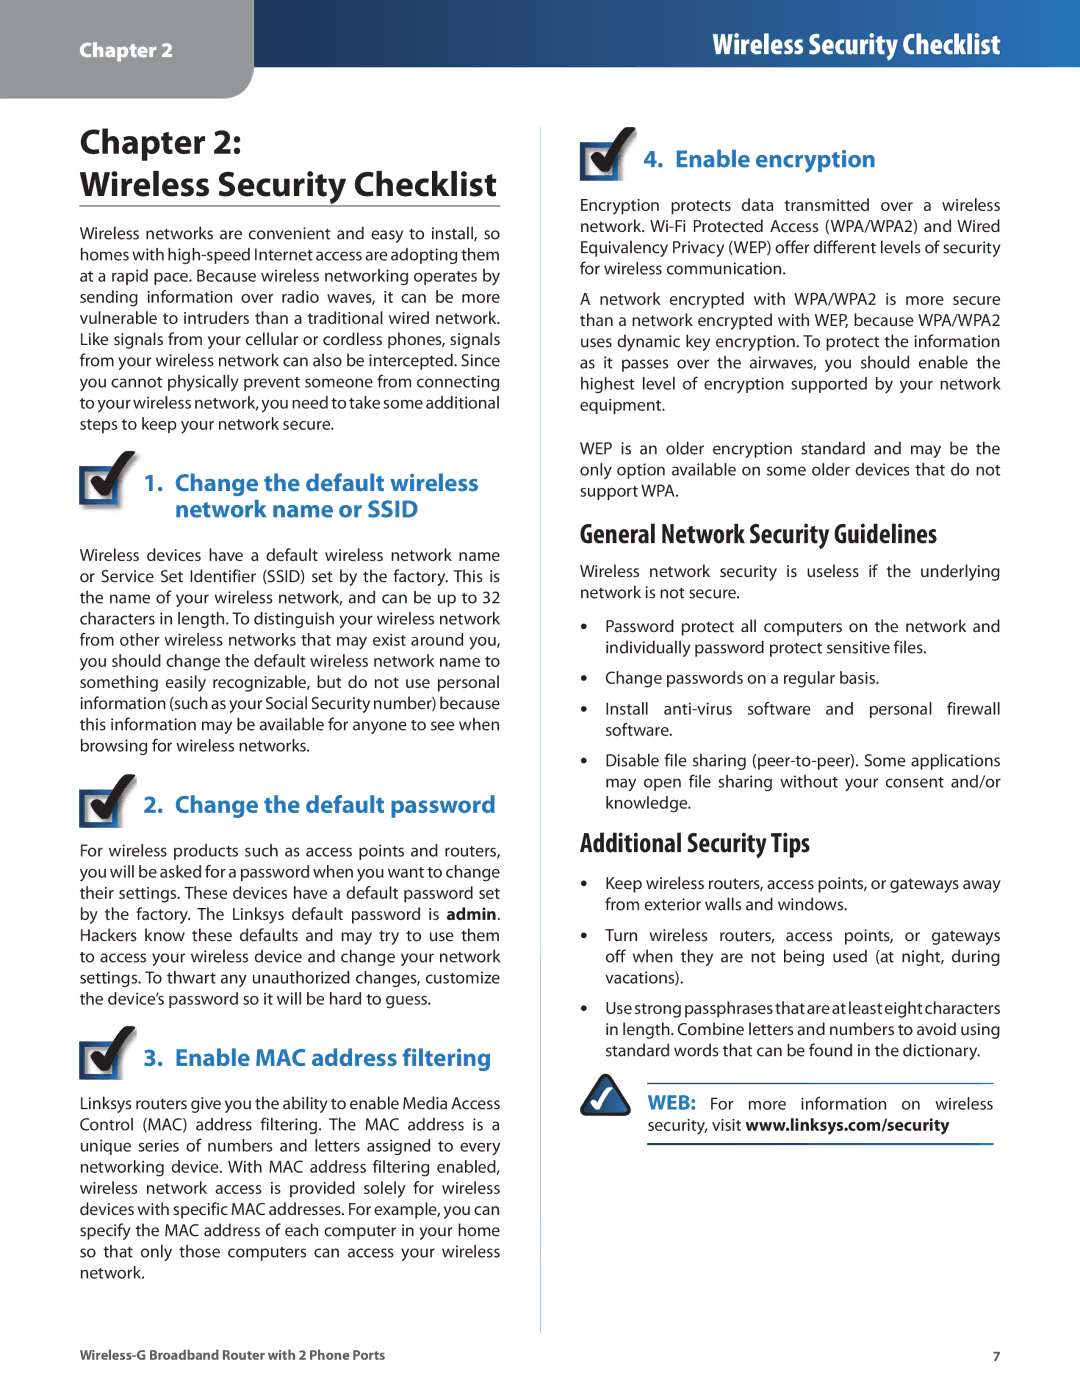 Linksys WRP400 manual Chapter Wireless Security Checklist, General Network Security Guidelines, Additional Security Tips 